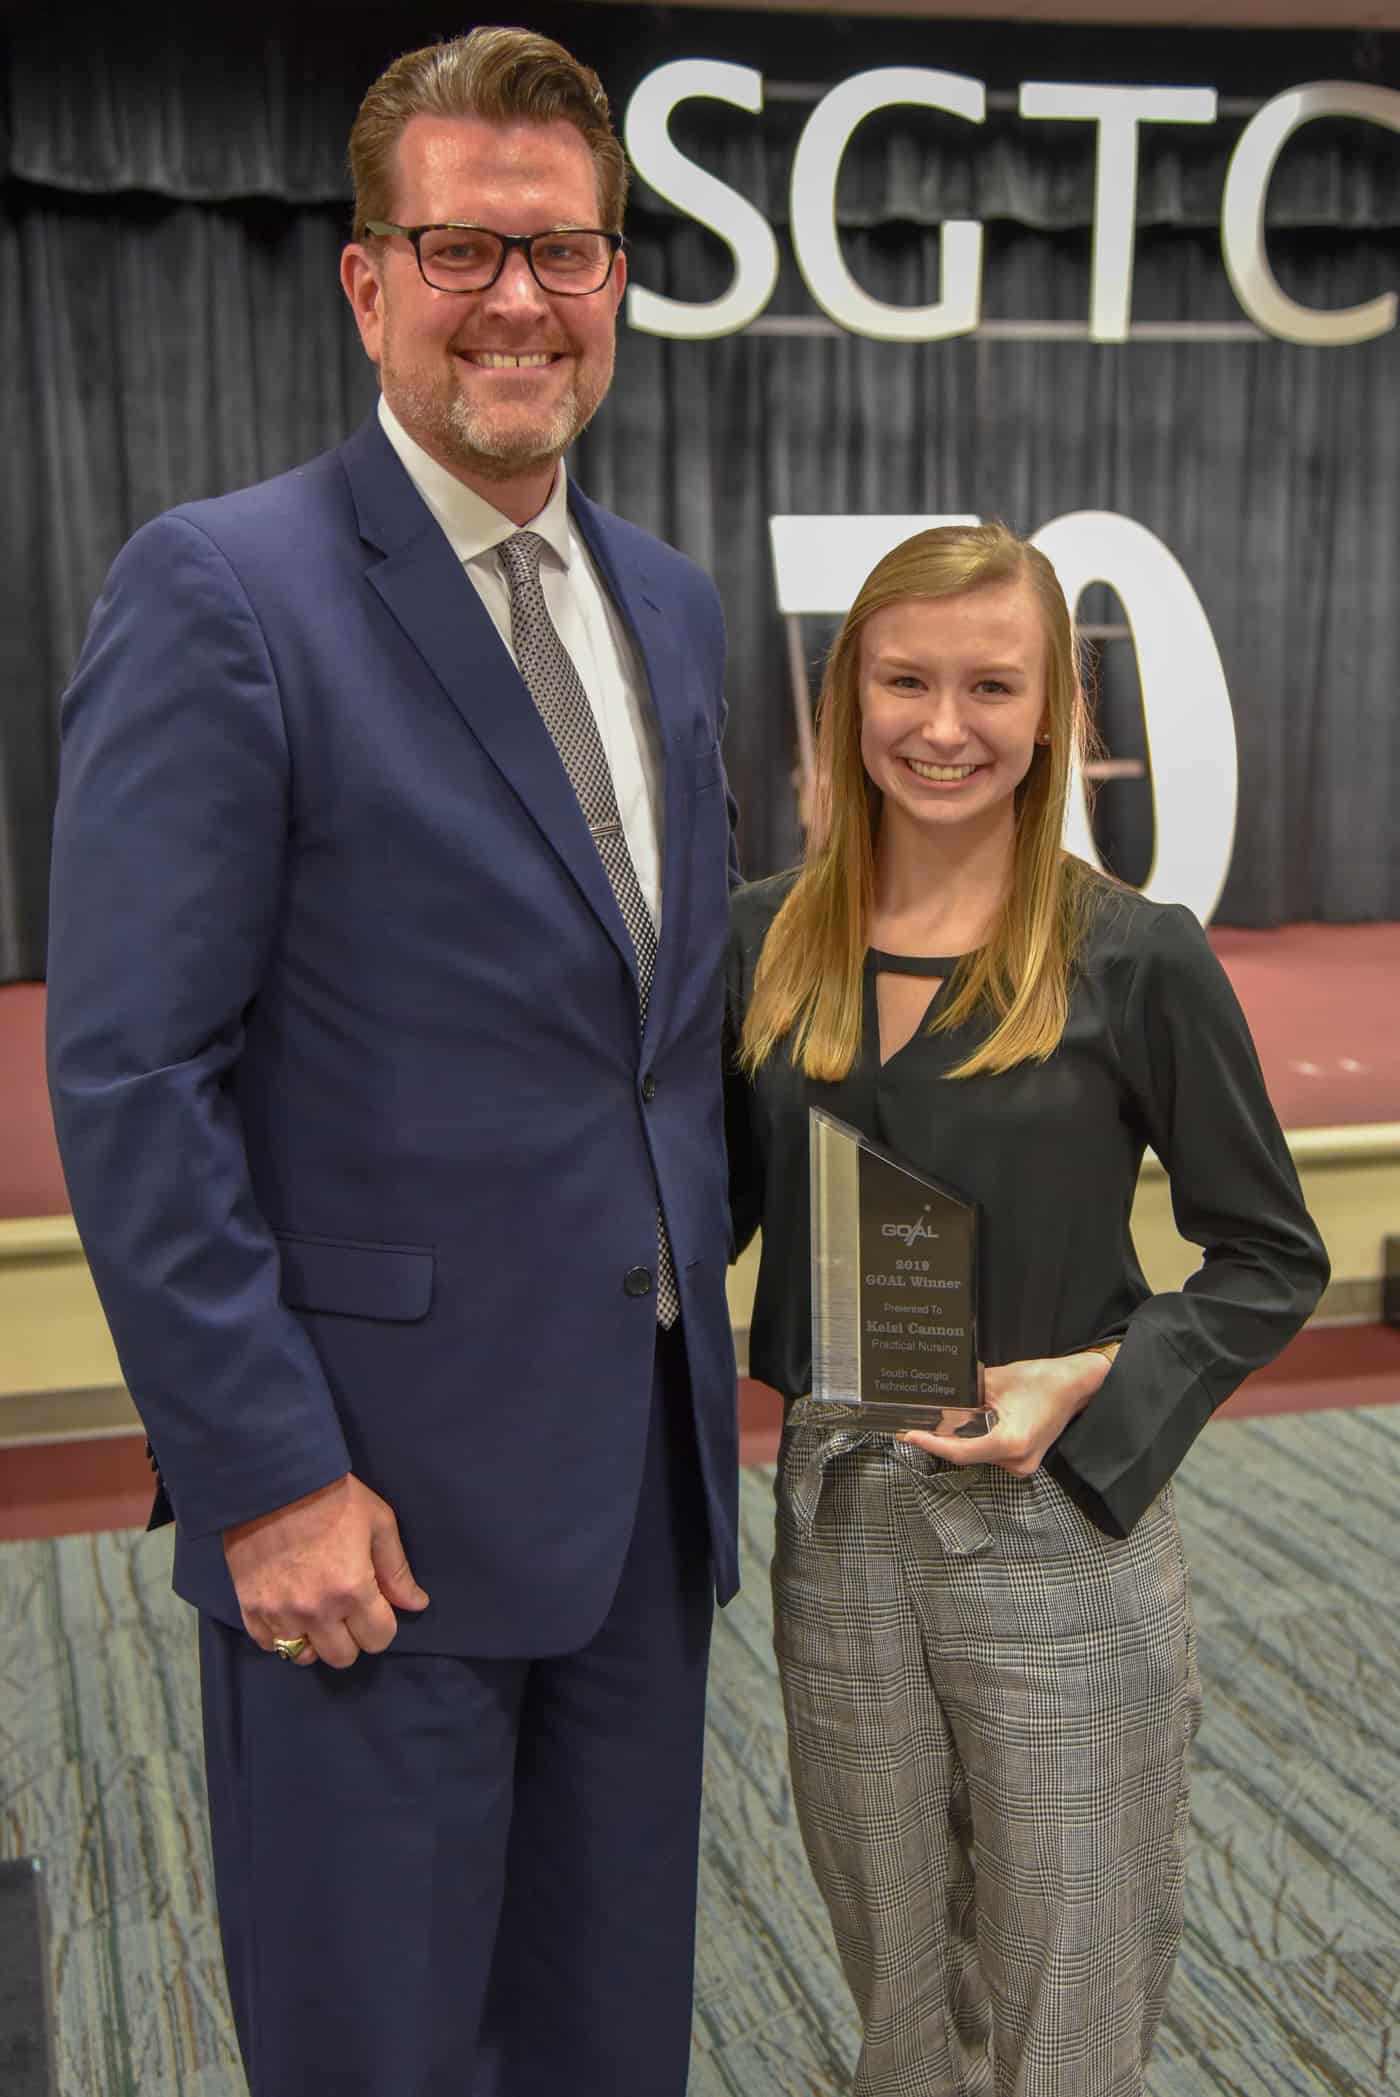 South Georgia Technical College’s 2019 GOAL Winner, Kelsi Cannon (right), accepts her award from SGTC president Dr. John Watford. Cannon will represent the college at the regional and state level in search of the Student of the Year title.